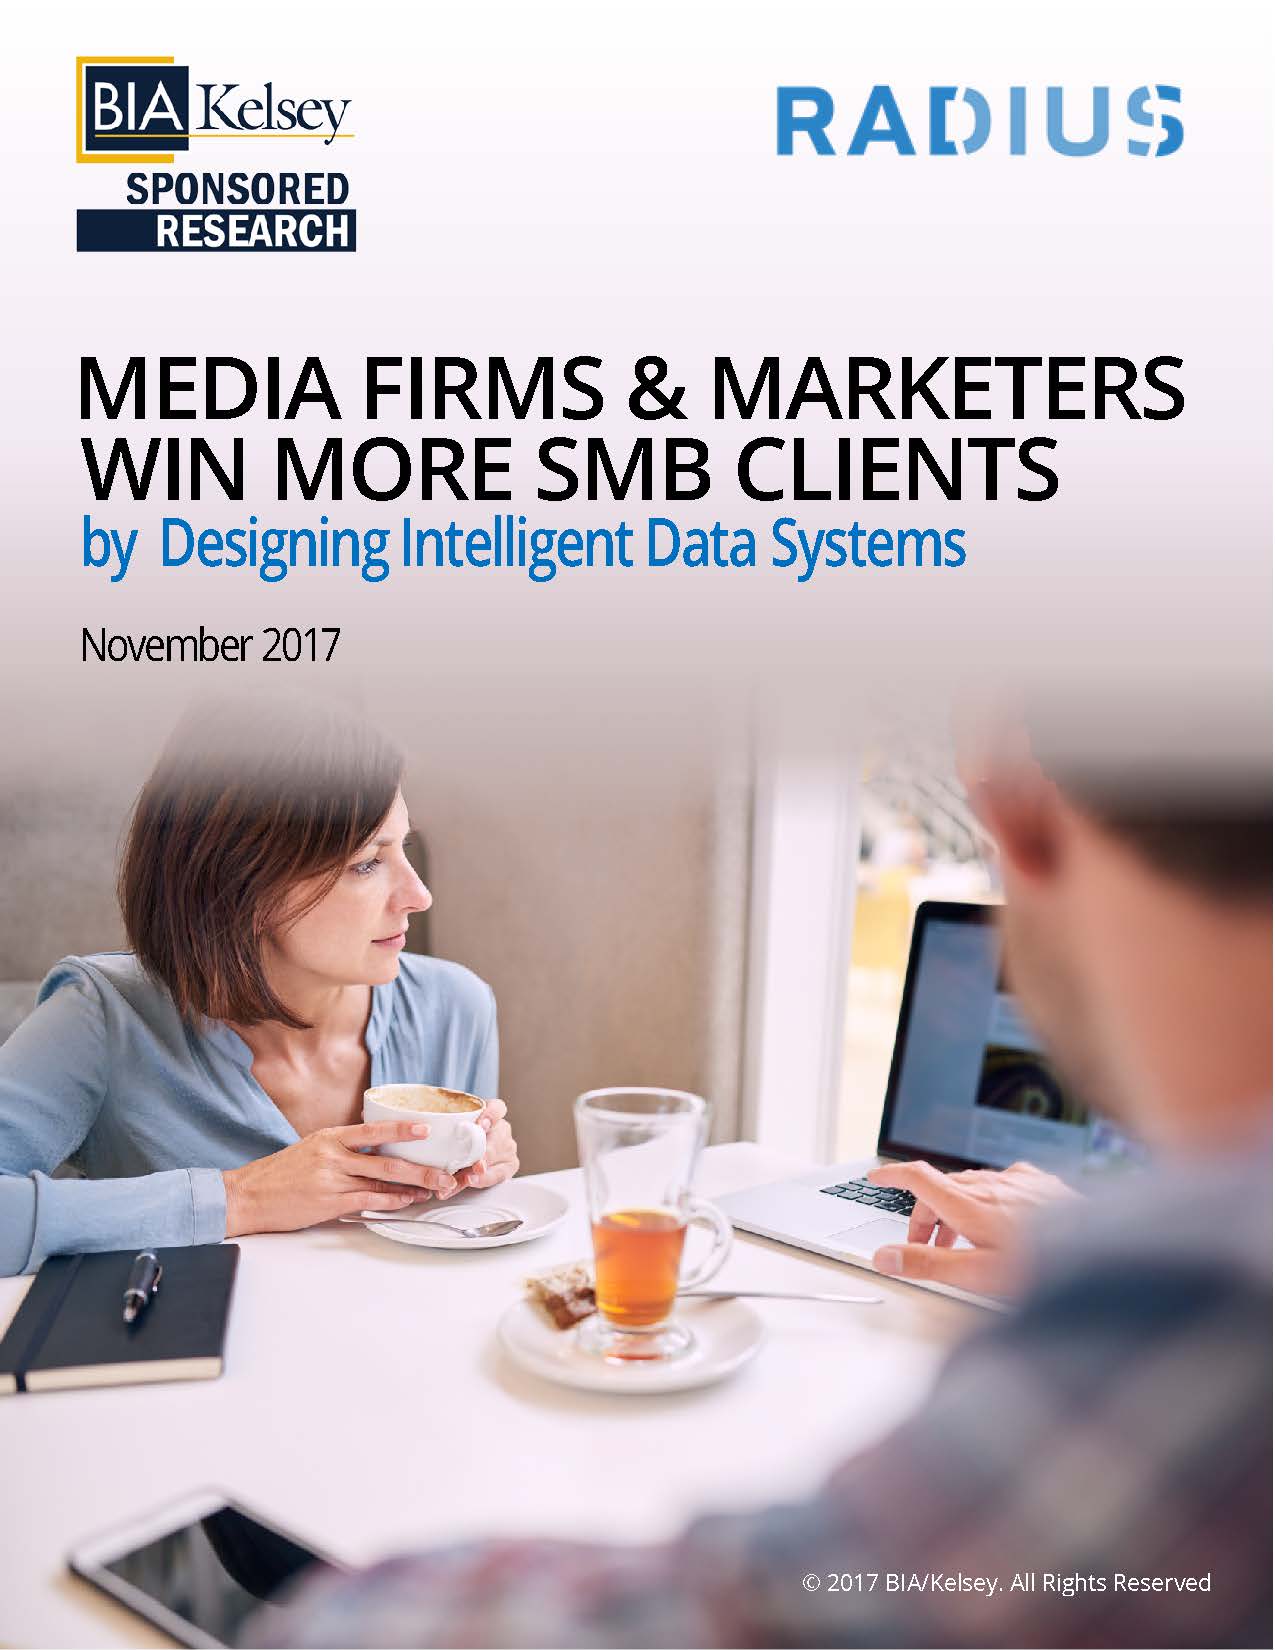 Intelligent Data System Designs Win More SMBs For Media, Marketers